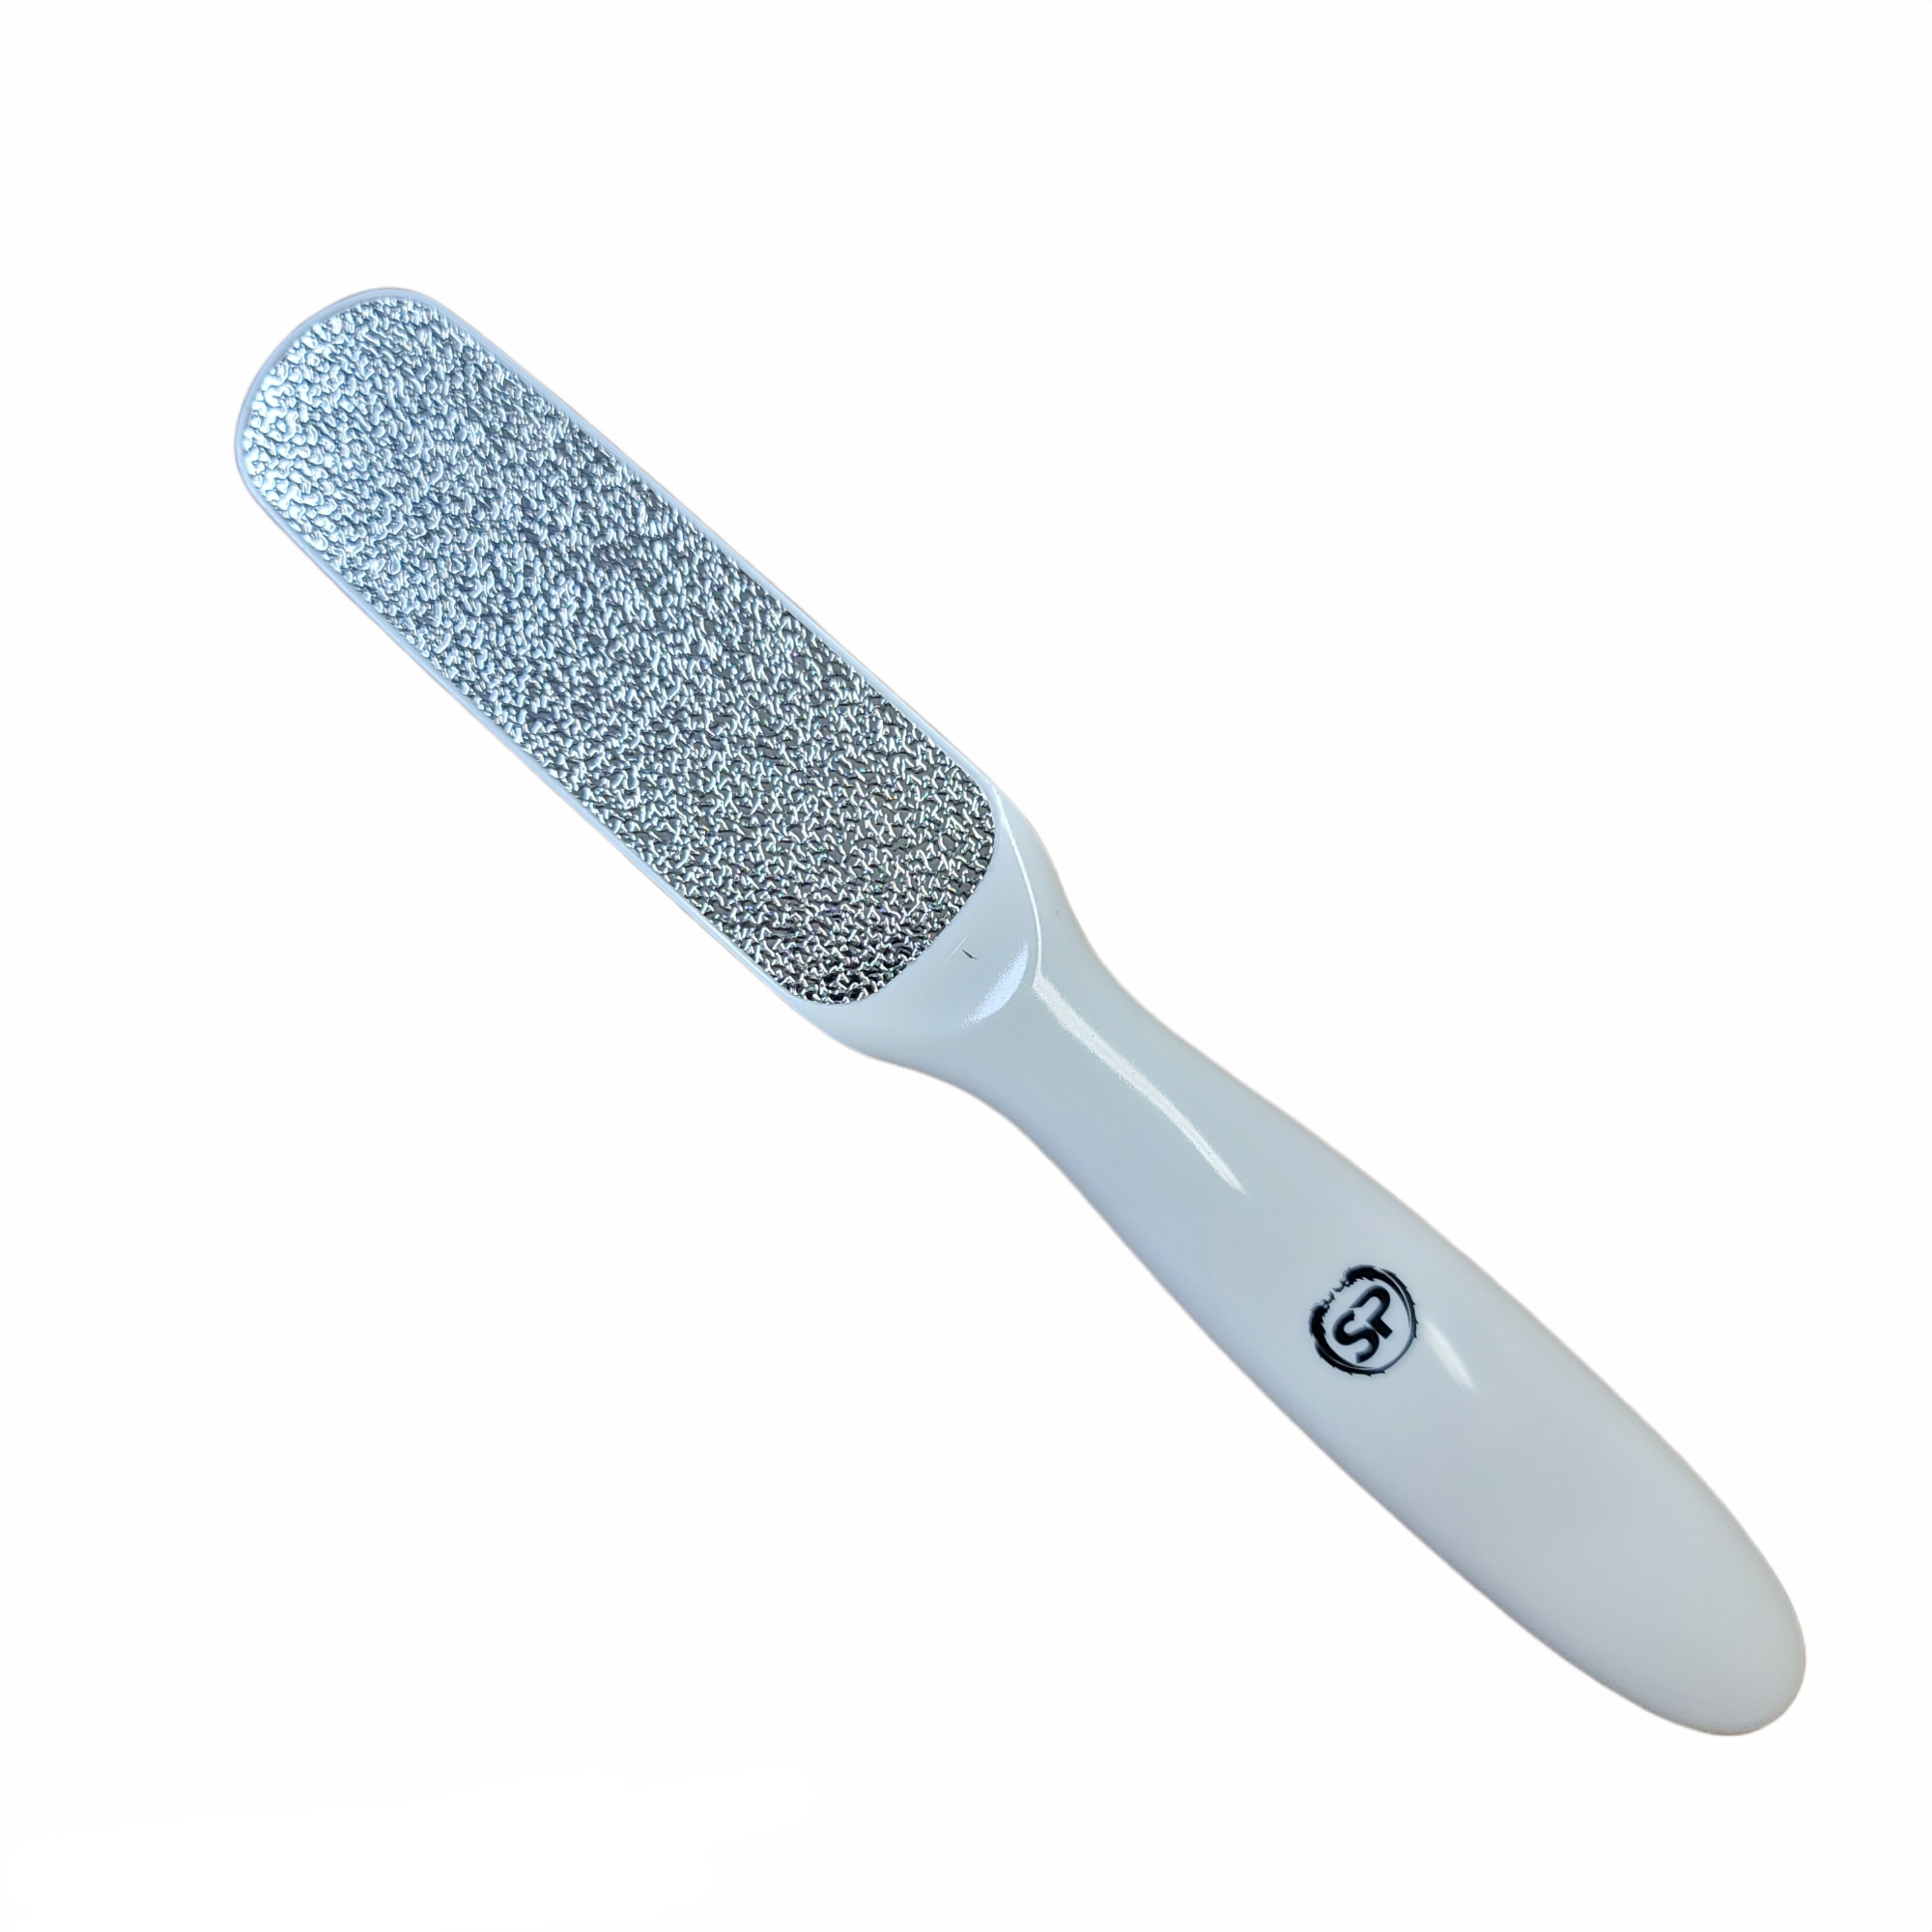 Karlash 2-Sided Nickel Foot File for Callus Trimming and Callus Removal,  White Mint File + Pumice Bar